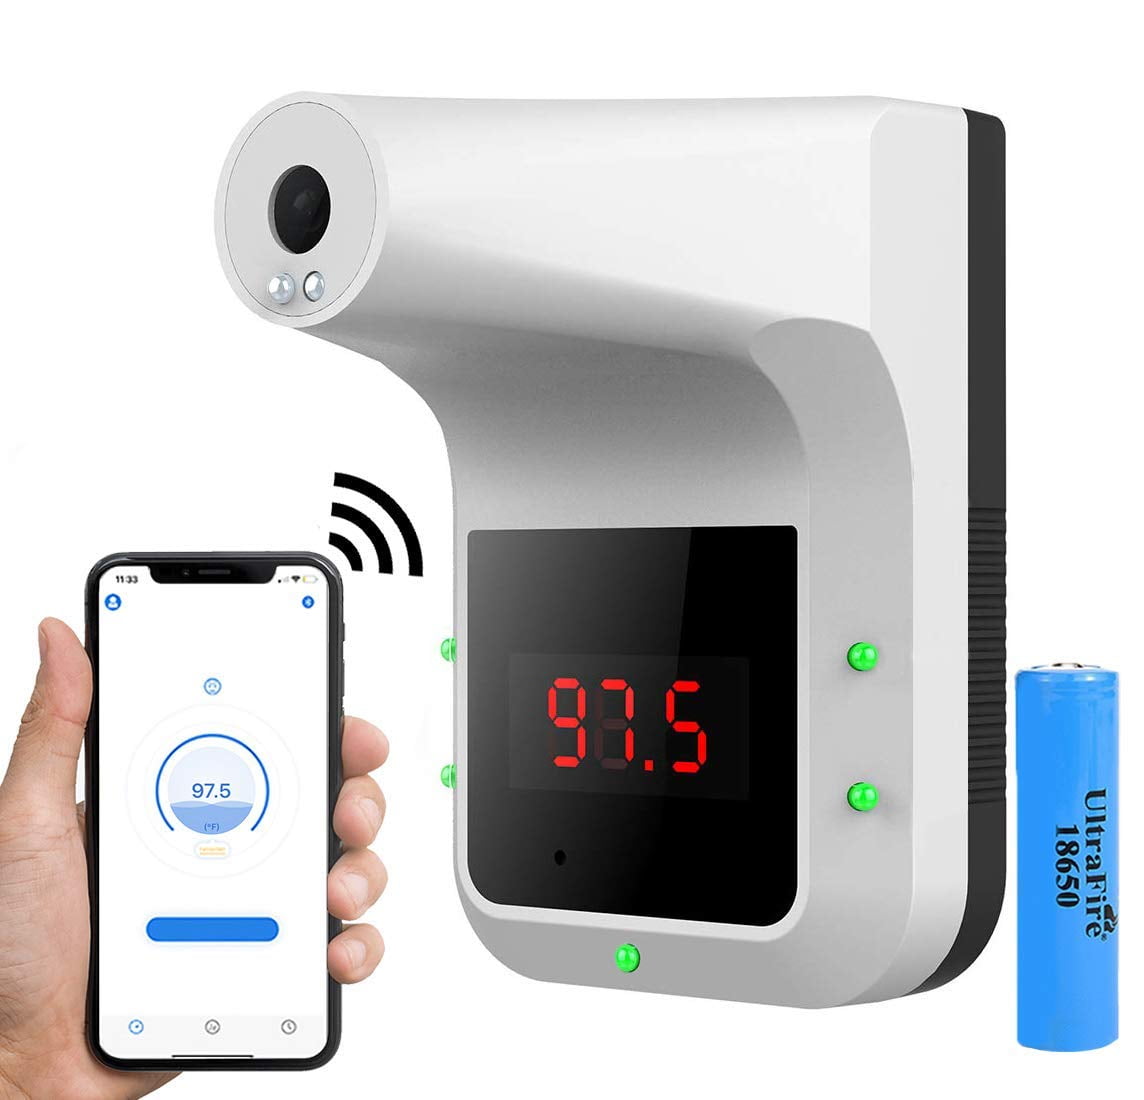 Industrial Automatic Instantaneous Detection Intelligent High Temperature Alarm MAYWU Wall-Mounted Body Thermometer Non-Contact Infrared Thermometer for Company Factory 